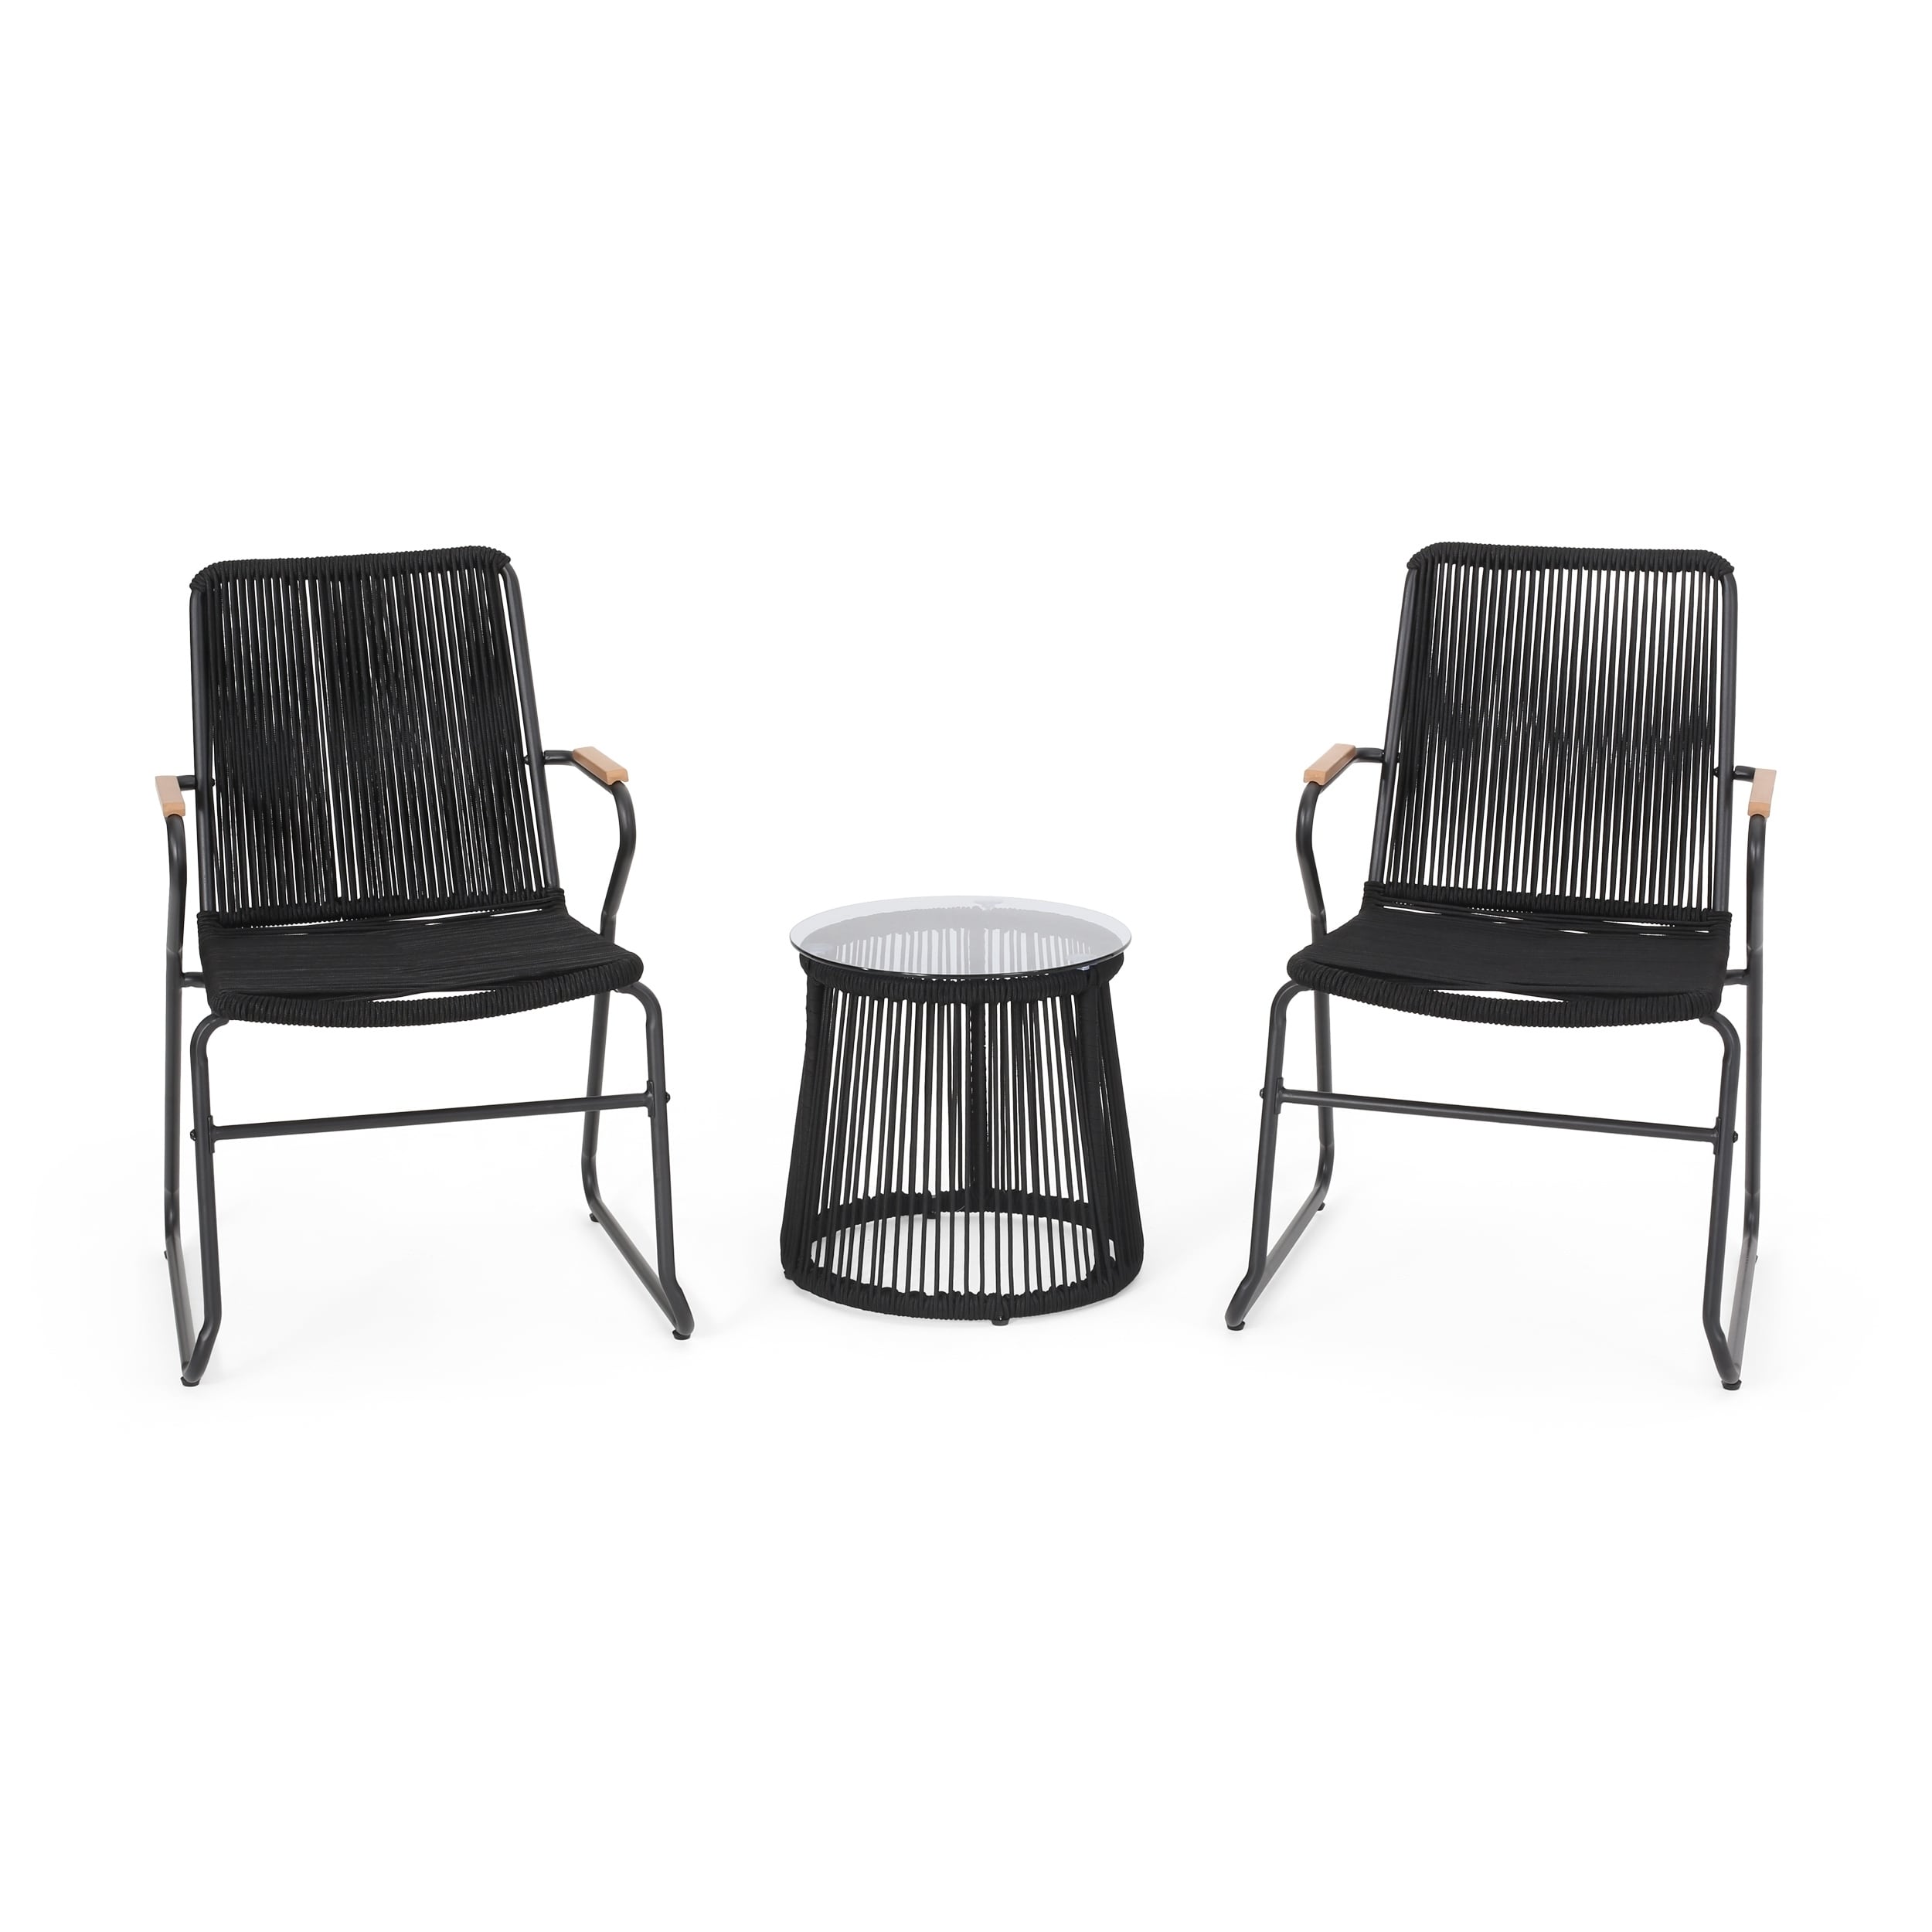 Moonstone Modern Outdoor Rope Weave Chat Set With Side Table By Christopher Knight Home